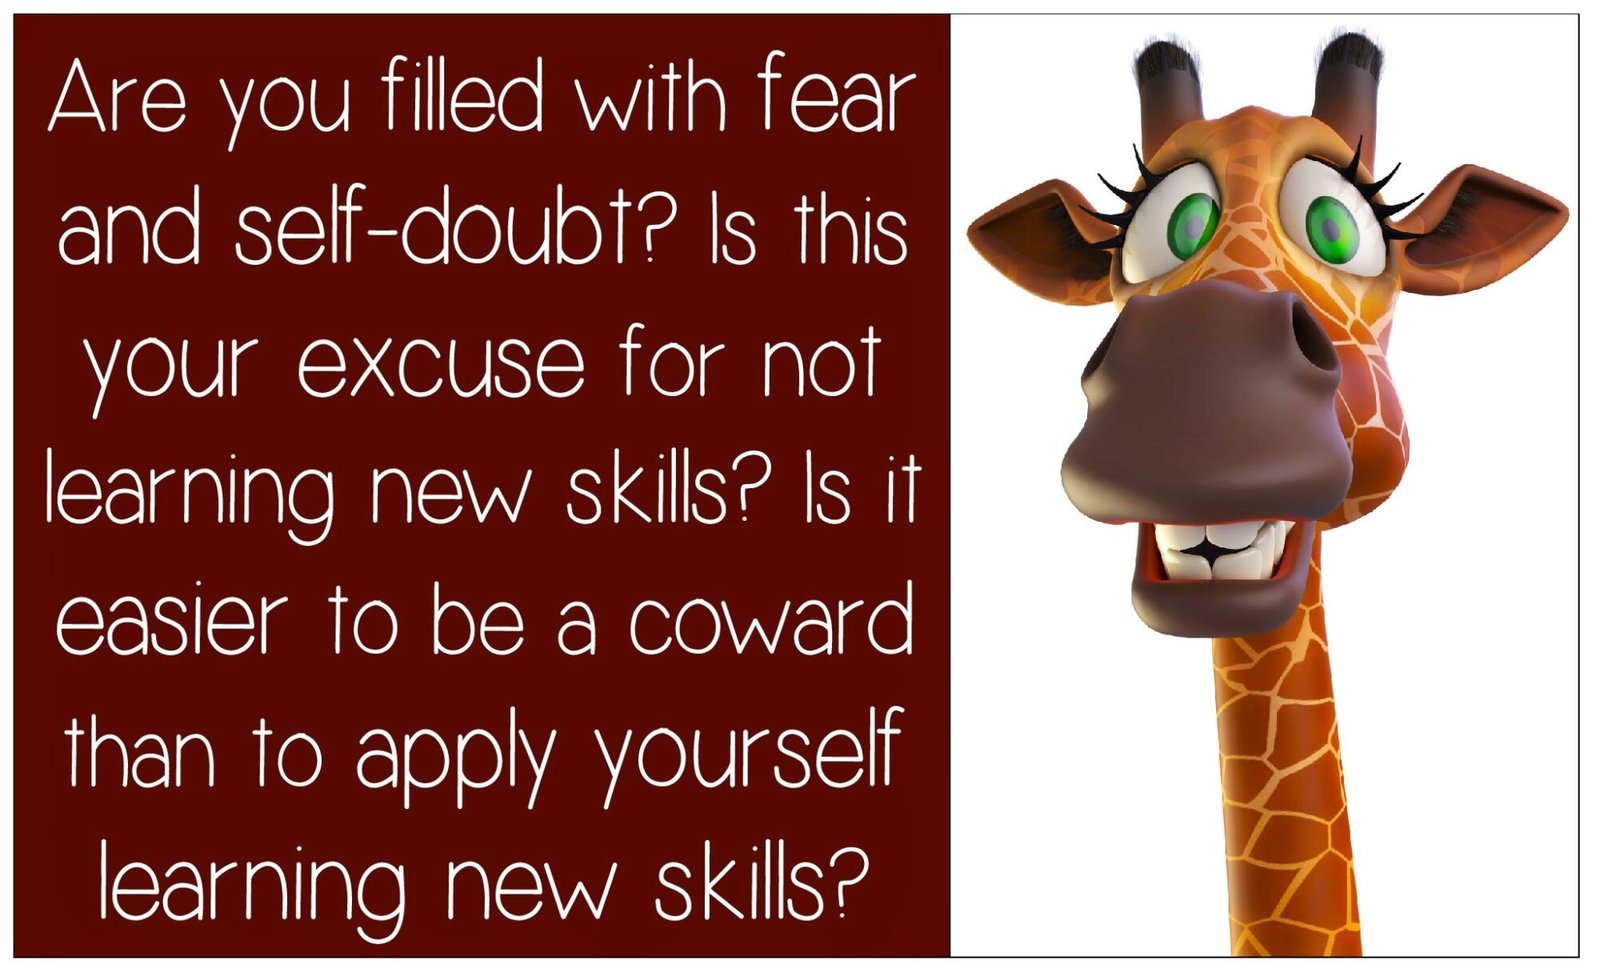 Are You Filled with Fear and Self-doubt